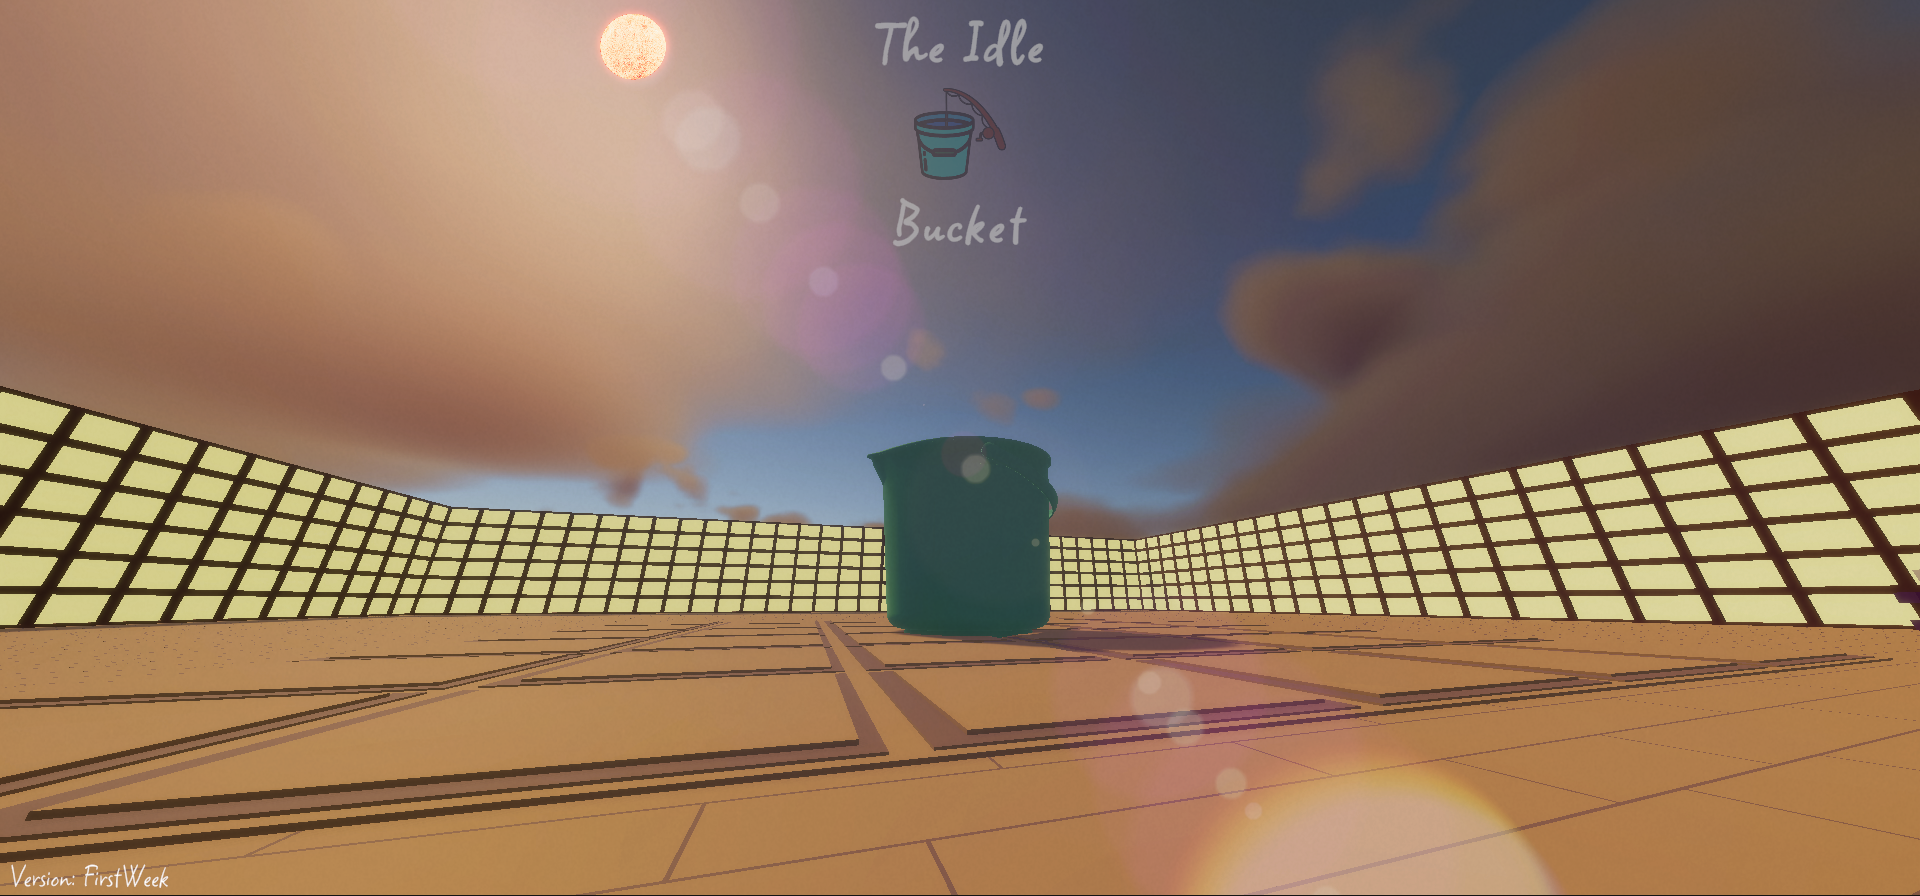 [DISCONTINUED] The Idle Bucket